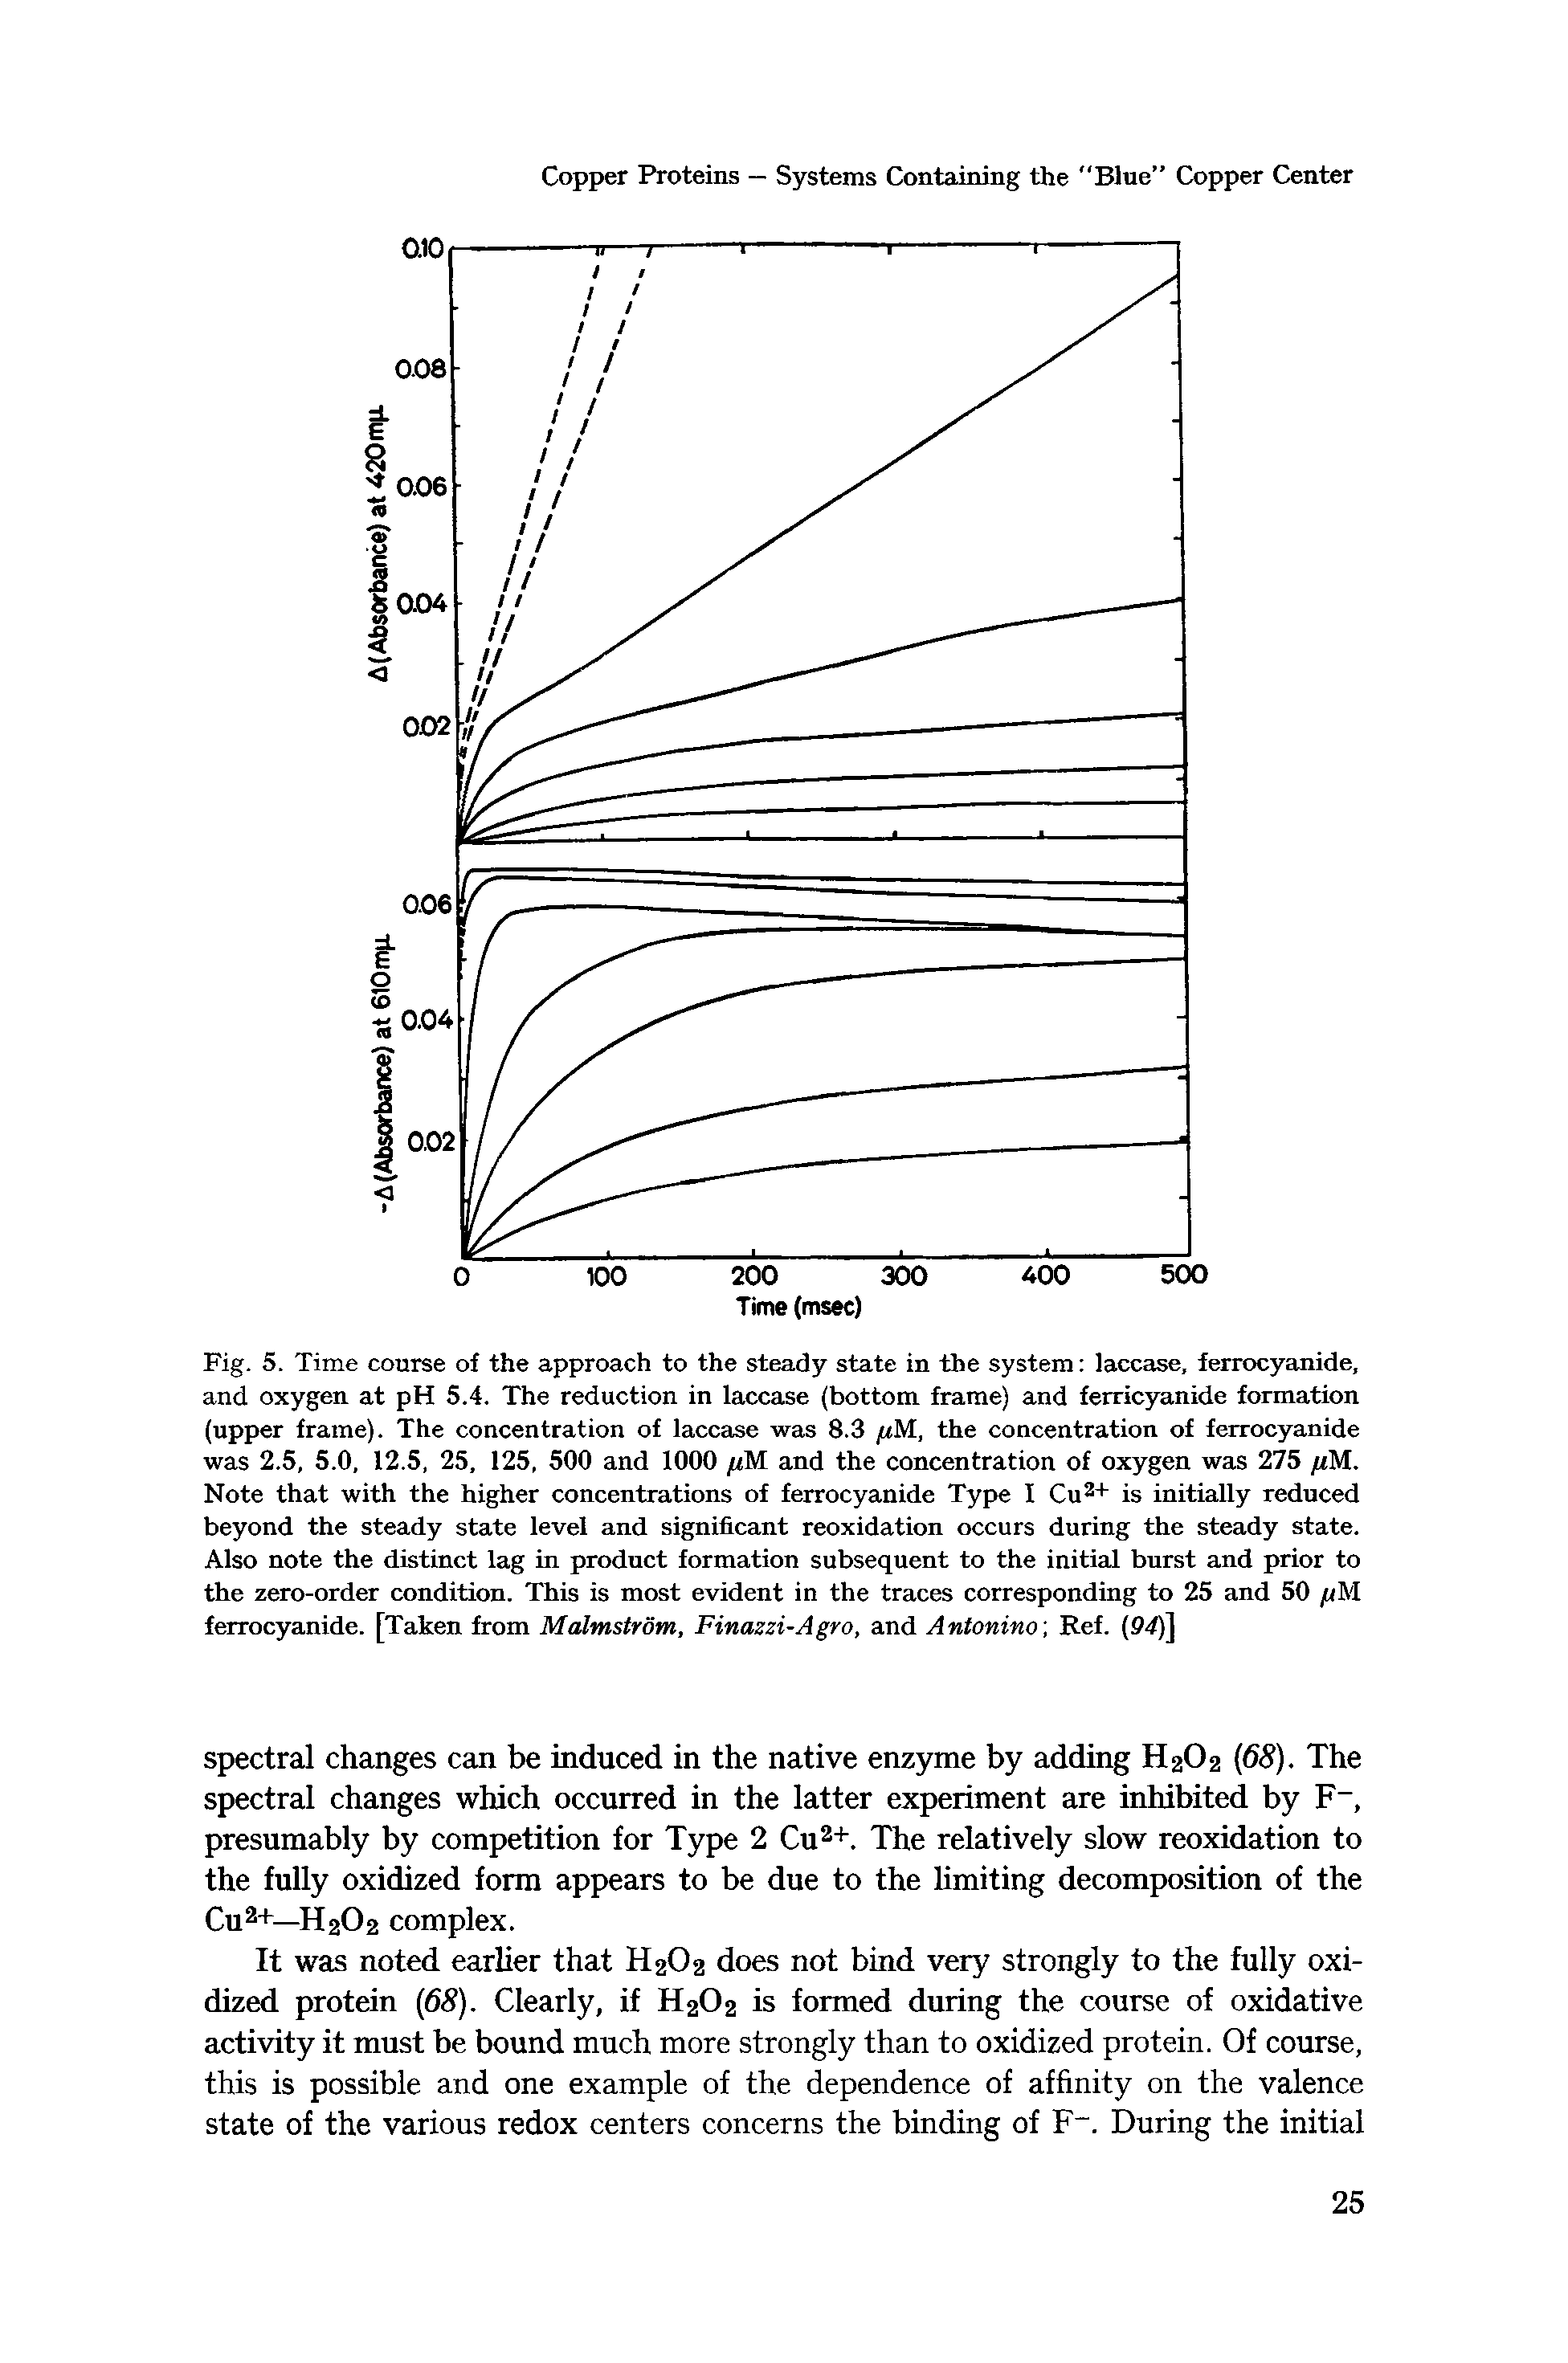 Fig. 5. Time course of the approach to the steady state in the system laccase, ferrocyanide, and oxygen at pH 5.4. The reduction in laccase (bottom frame) and ferricyanide formation (upper frame). The concentration of laccase was 8.3 //M, the concentration of ferrocyanide was 2.5, 5.0, 12.5, 25, 125, 500 and 1000 //M and the concentration of oxygen was 275 fiM.. Note that with the higher concentrations of ferrocyanide Type I Cu + is initially reduced beyond the steady state level and significant reoxidation occurs during the steady state. Also note the distinct lag in product formation subsequent to the initial burst and prior to the zero-order condition. This is most evident in the traces corresponding to 25 and 50 //M ferrocyanide. [Taken from McUmstrom, Finaszi-Agro, and AntoninaRef. (94)]...